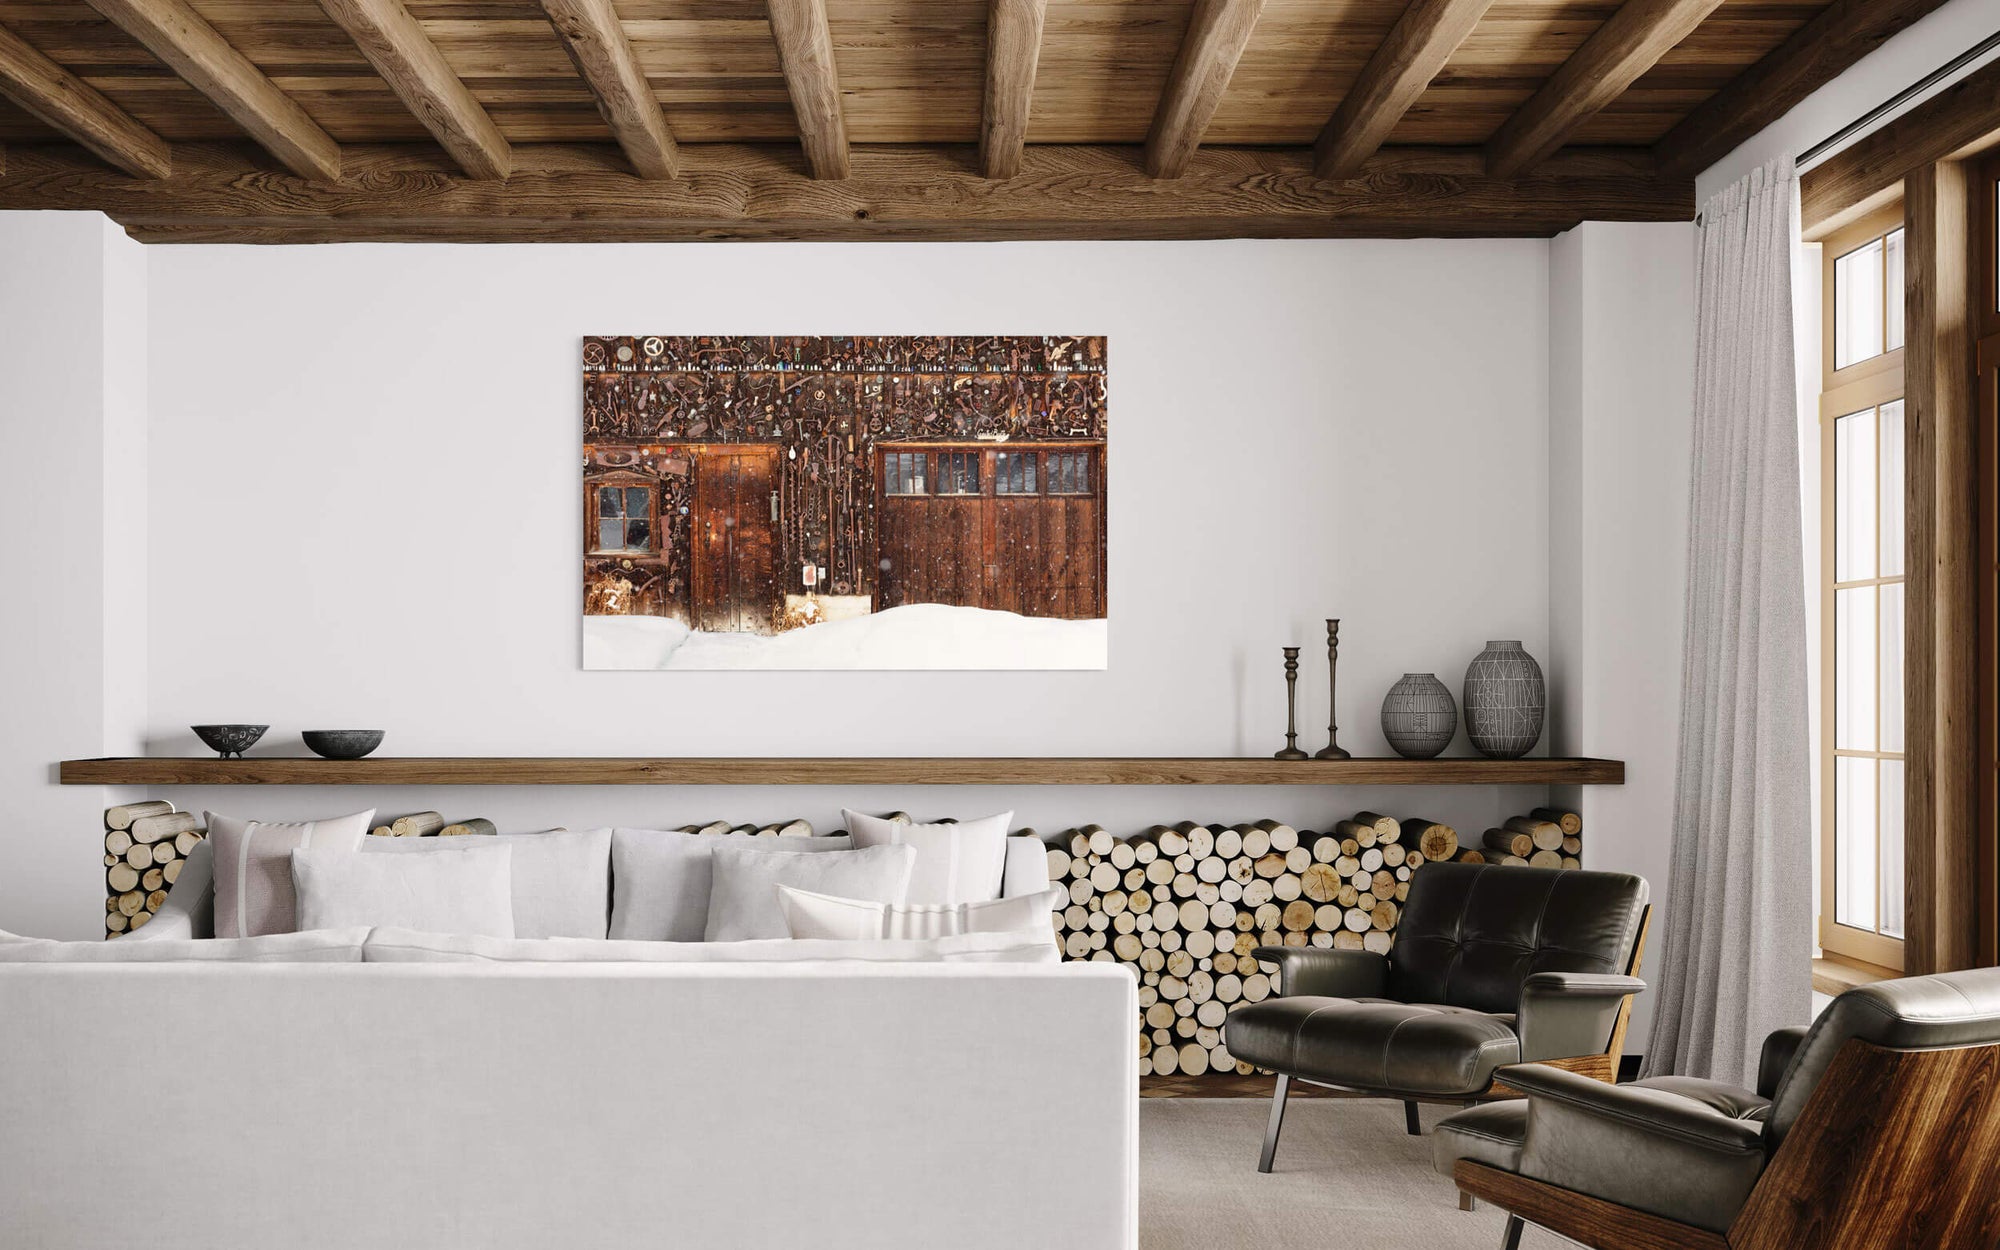 A Crested Butte picture of a snowed-in cabin in winter hangs in a living room.